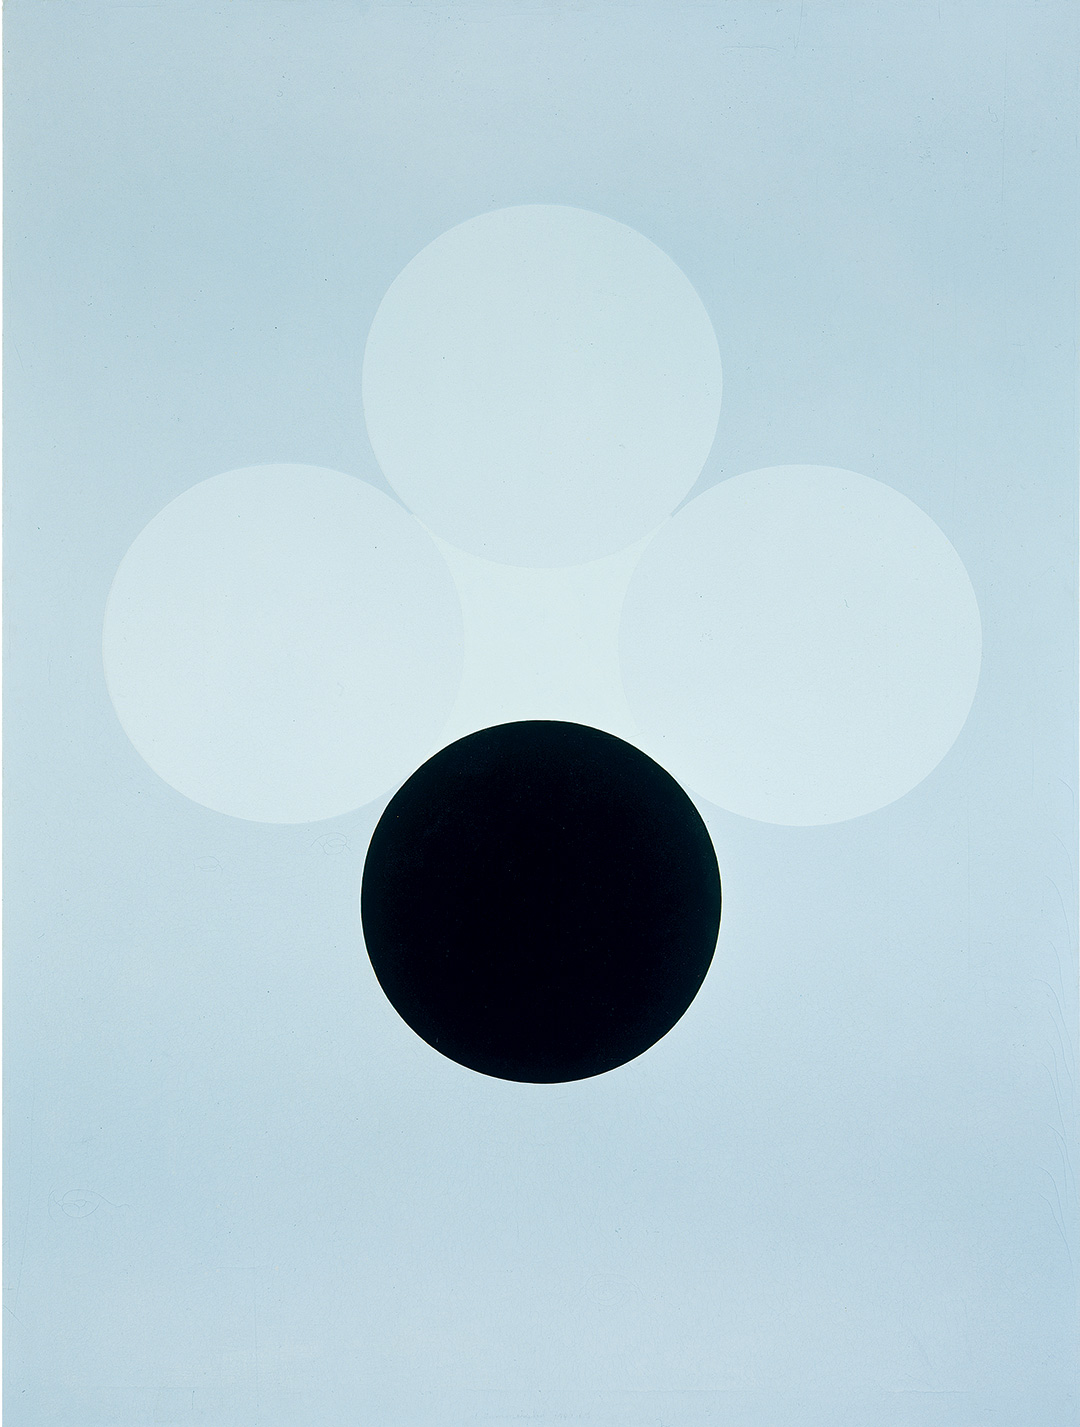 Image of artwork Come by Frederick Hammersley